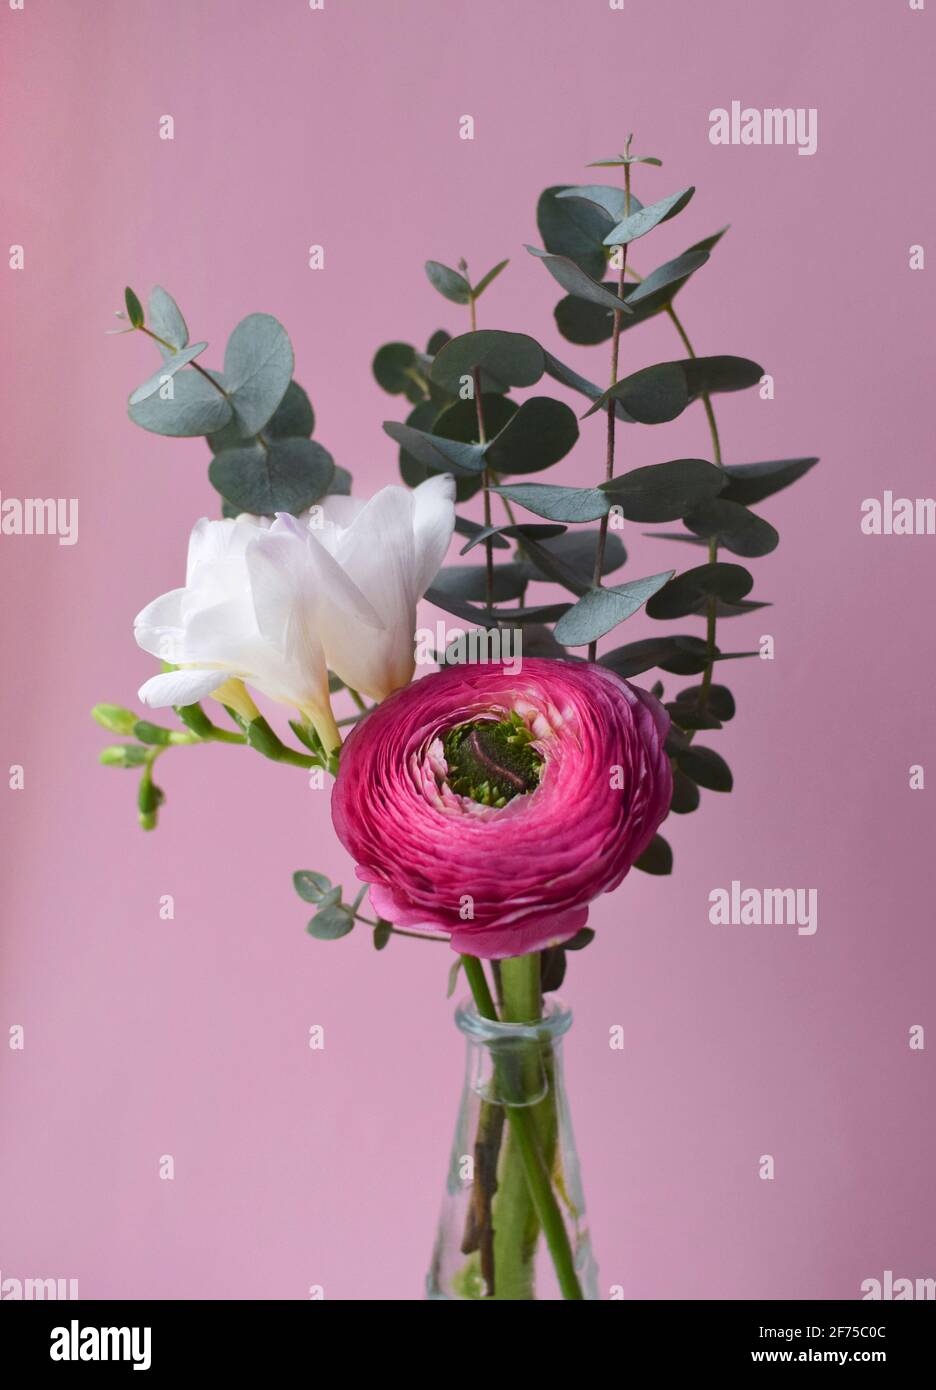 Delicate bouquet of bright pink ranunculus flower and white freesia with eucalyptus sprigs on a pink background Stock Photo